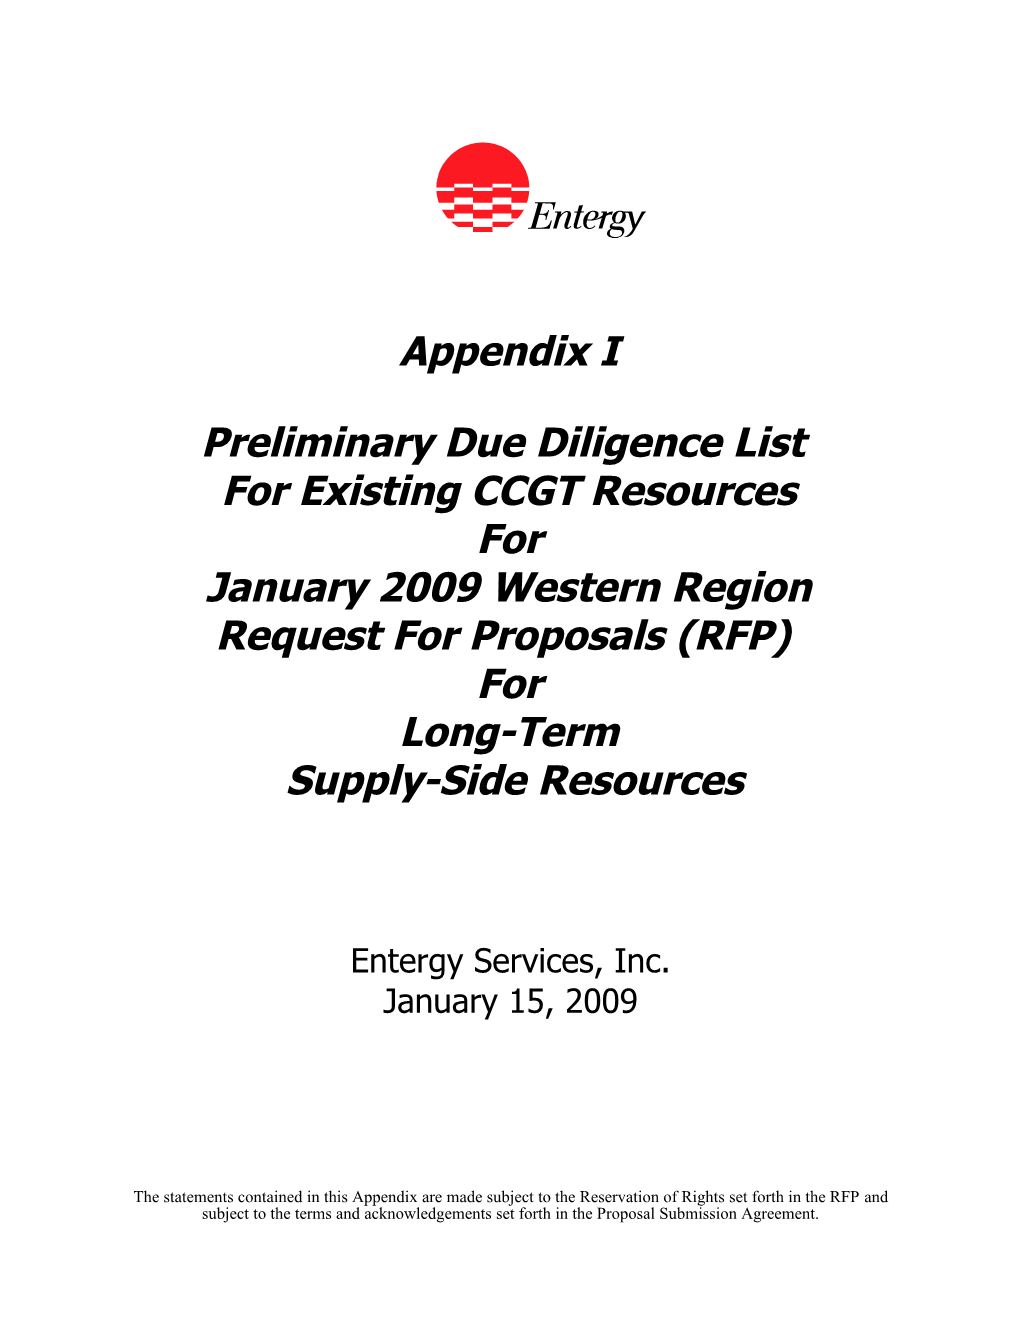 Preliminary Due Diligence List for Existing CCGT Resources